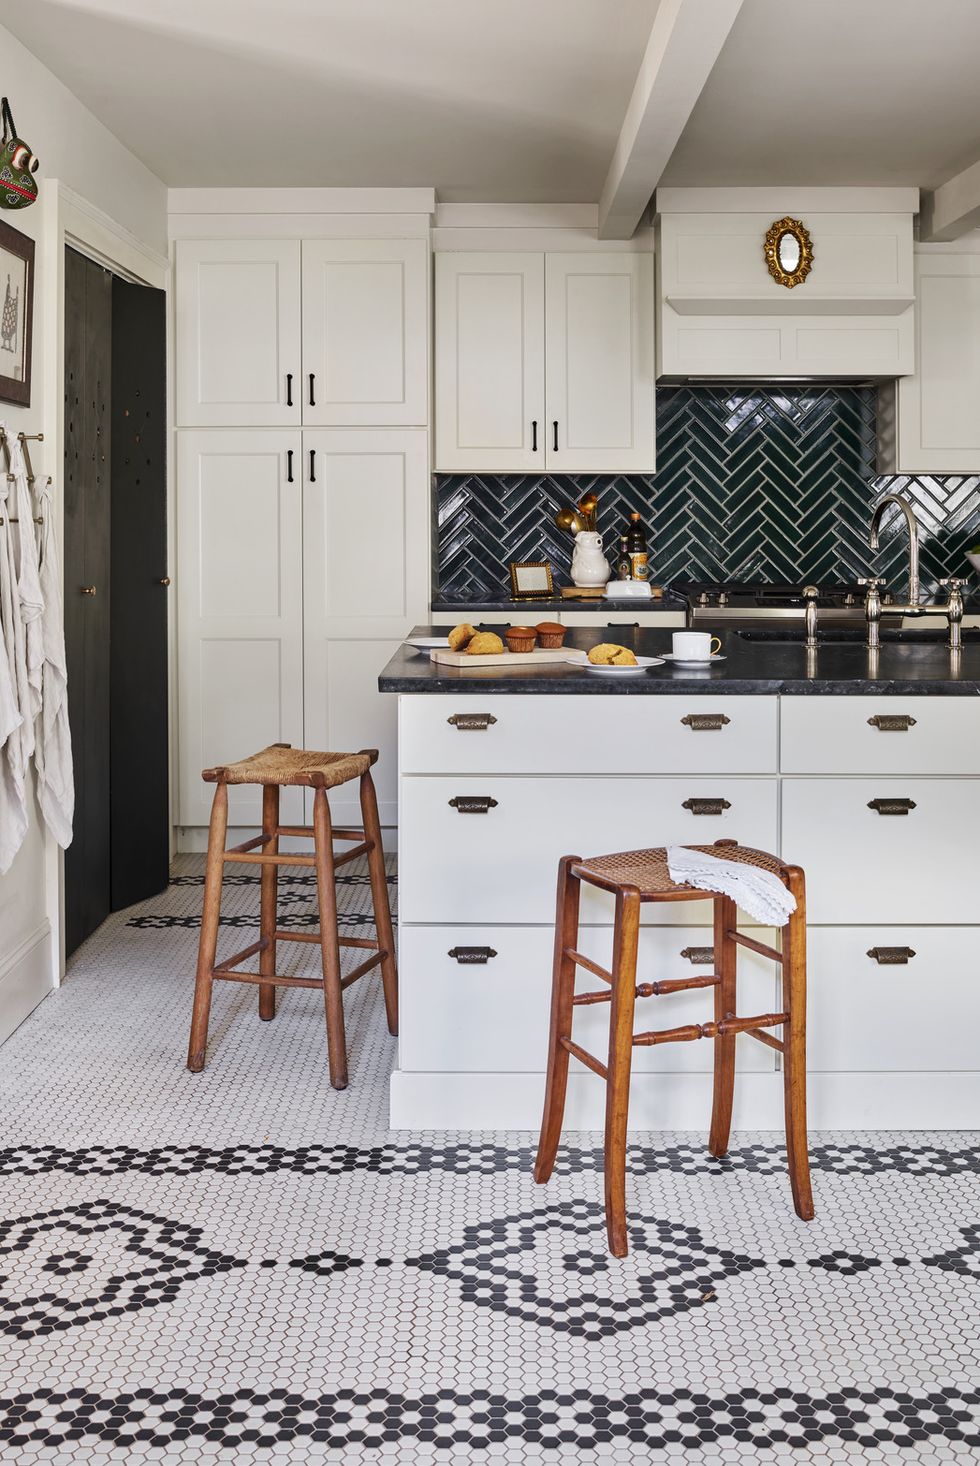 The country kitchen: 10 ways to achieve the look - The English Home